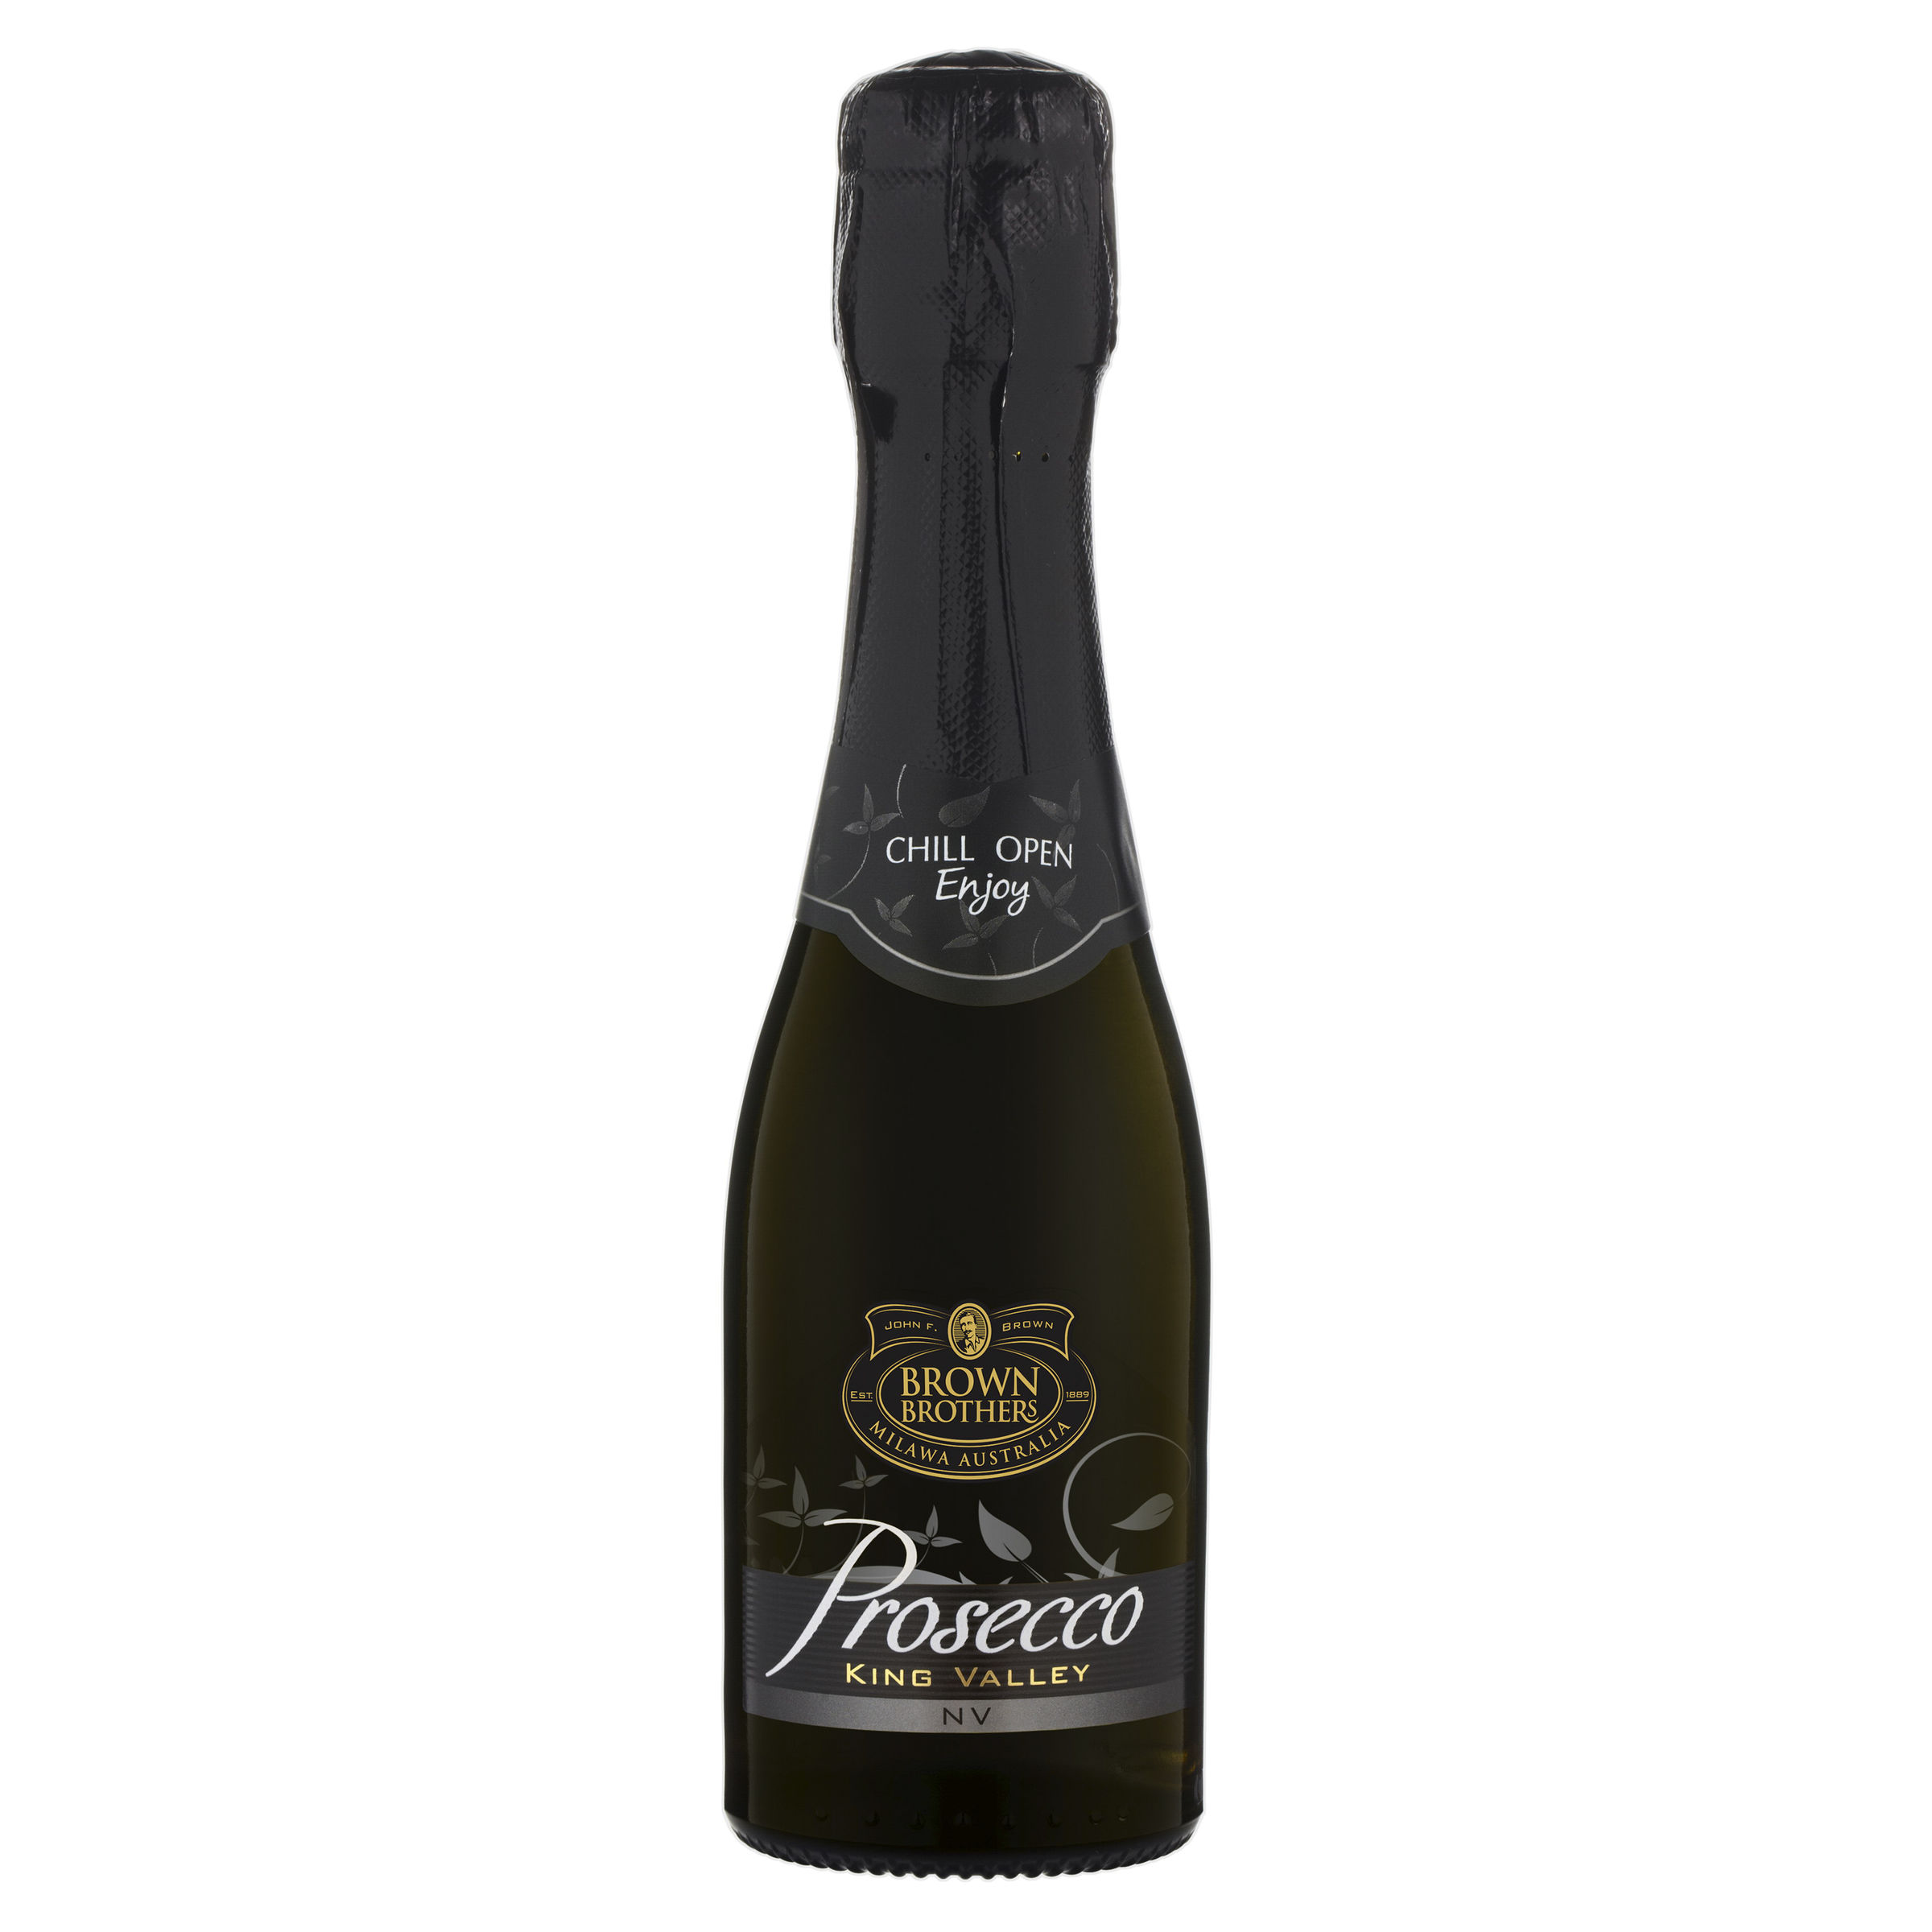 BROWN BROTHERS PROSECCO NON VINTAGE